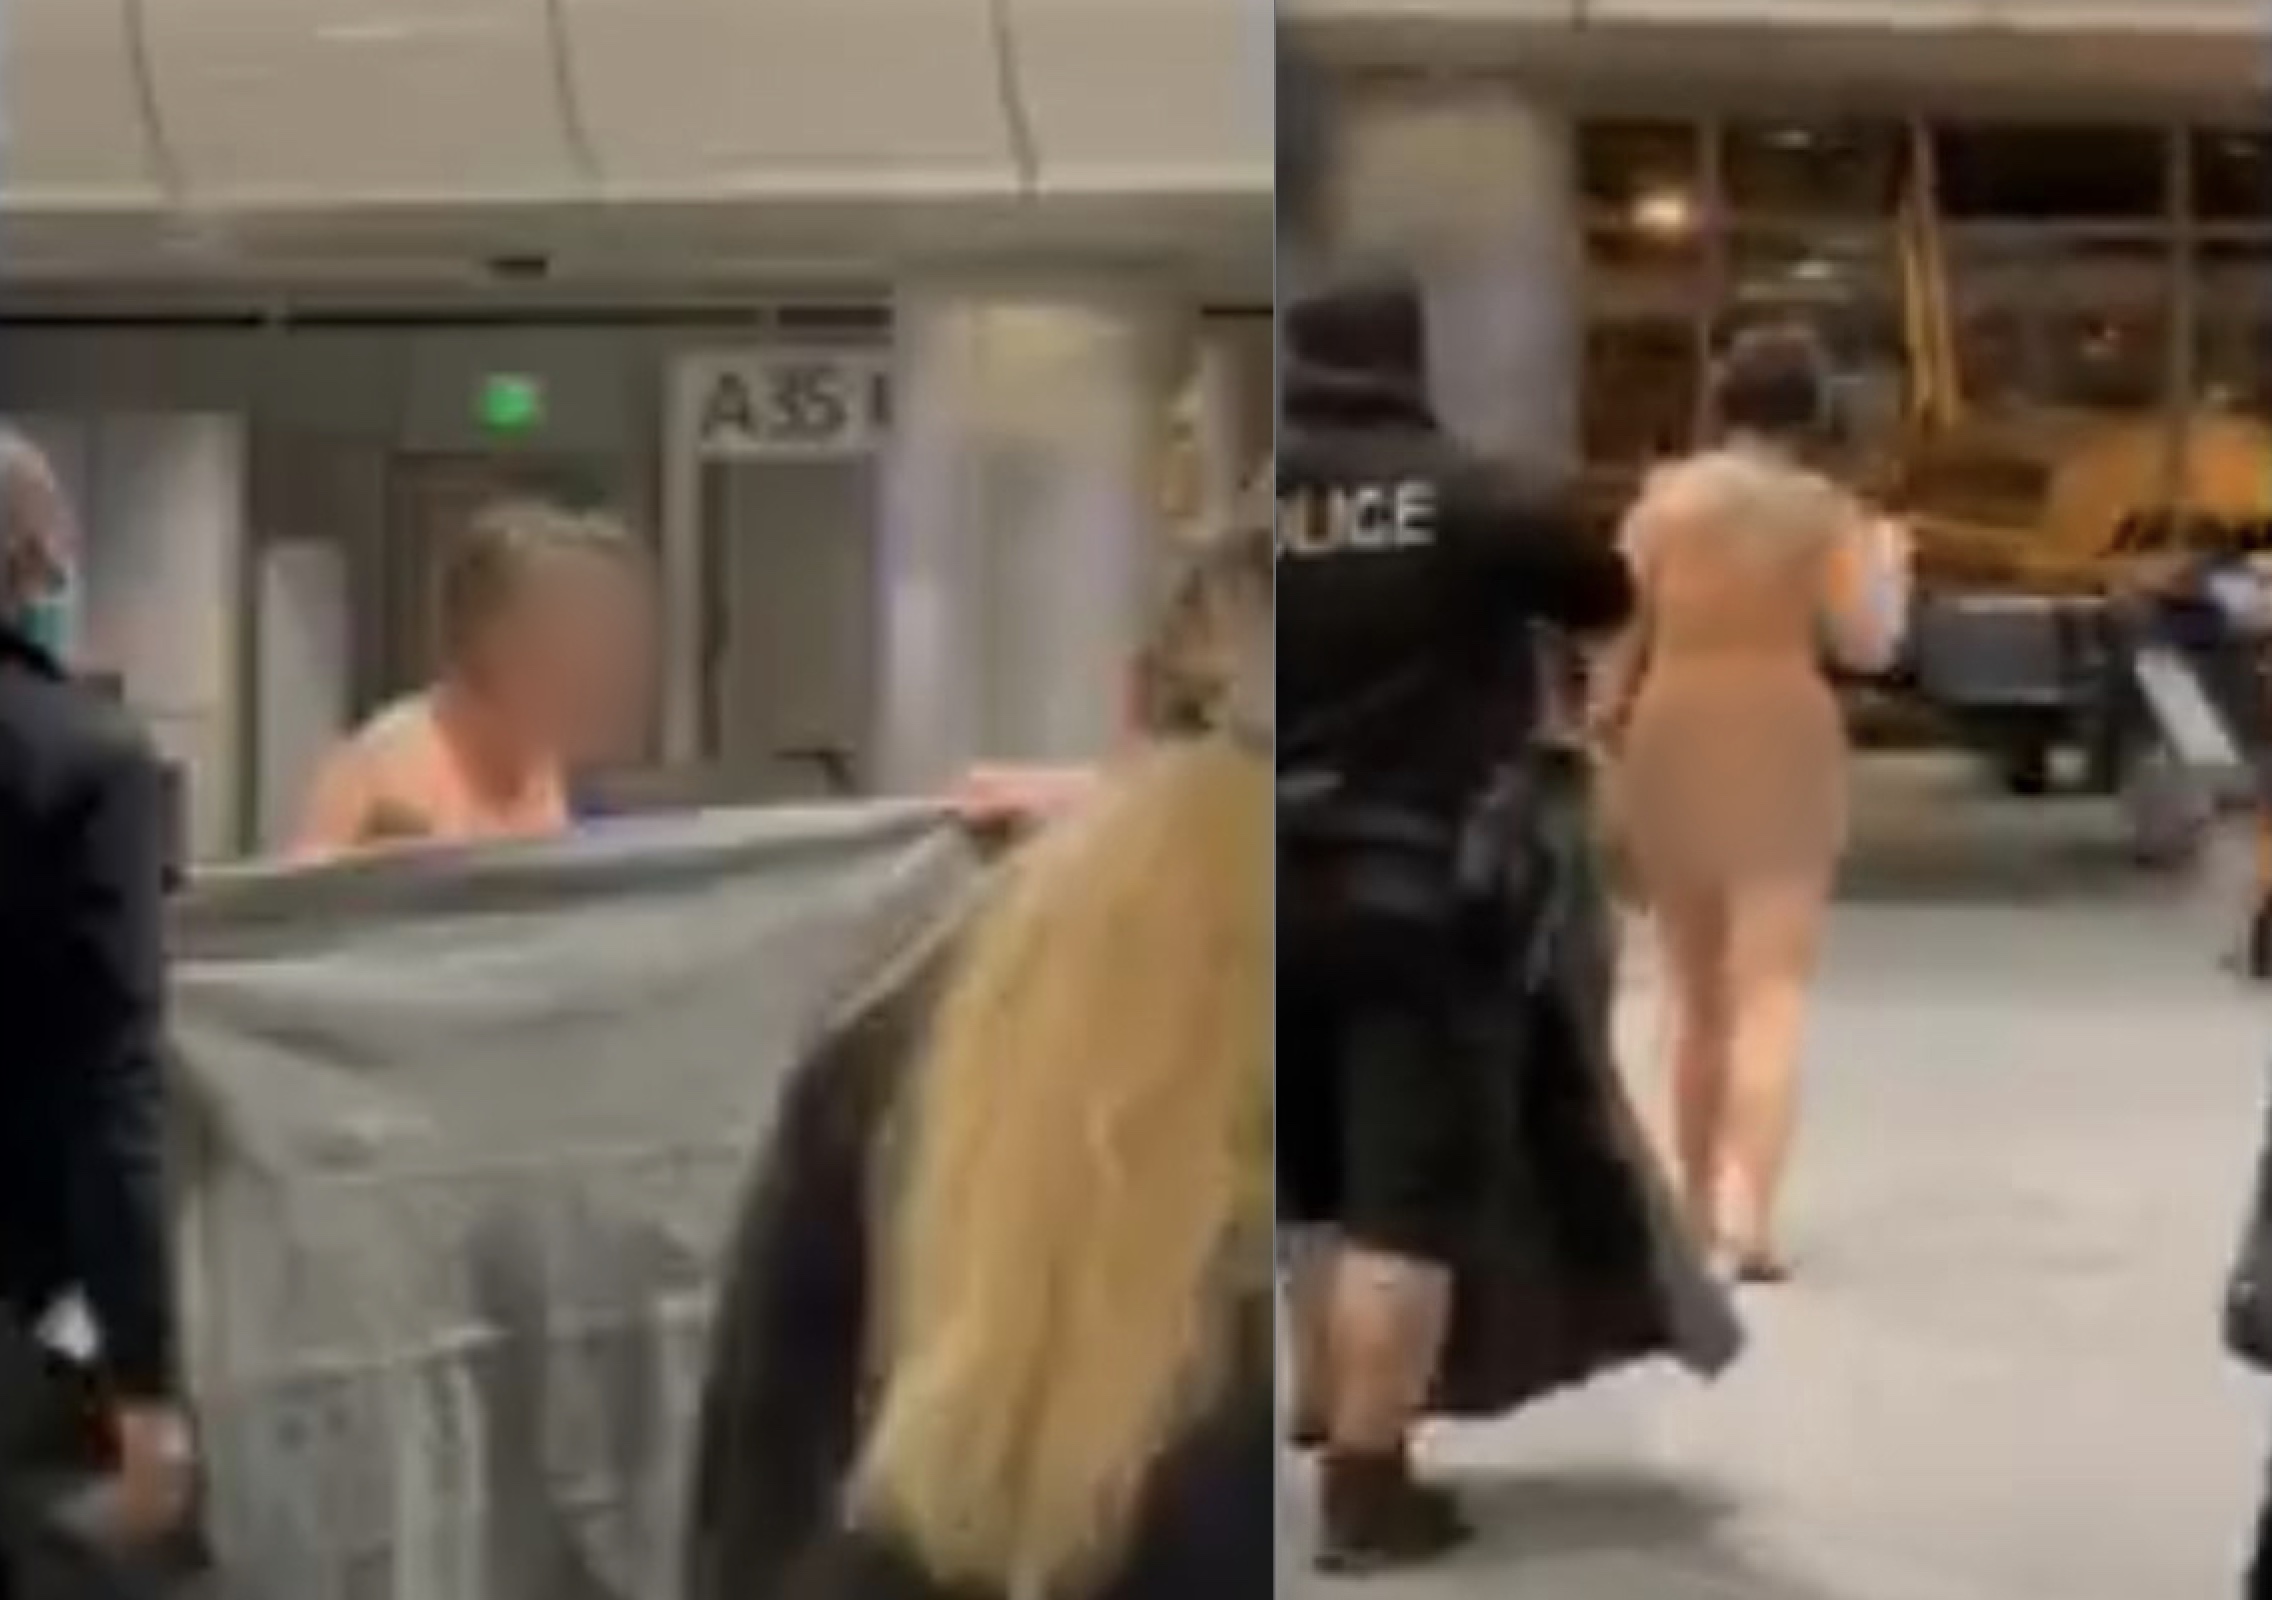 Naked Woman At Denver Airport Walked Around Concourse Asking Passengers, ‘Where Are You From?’